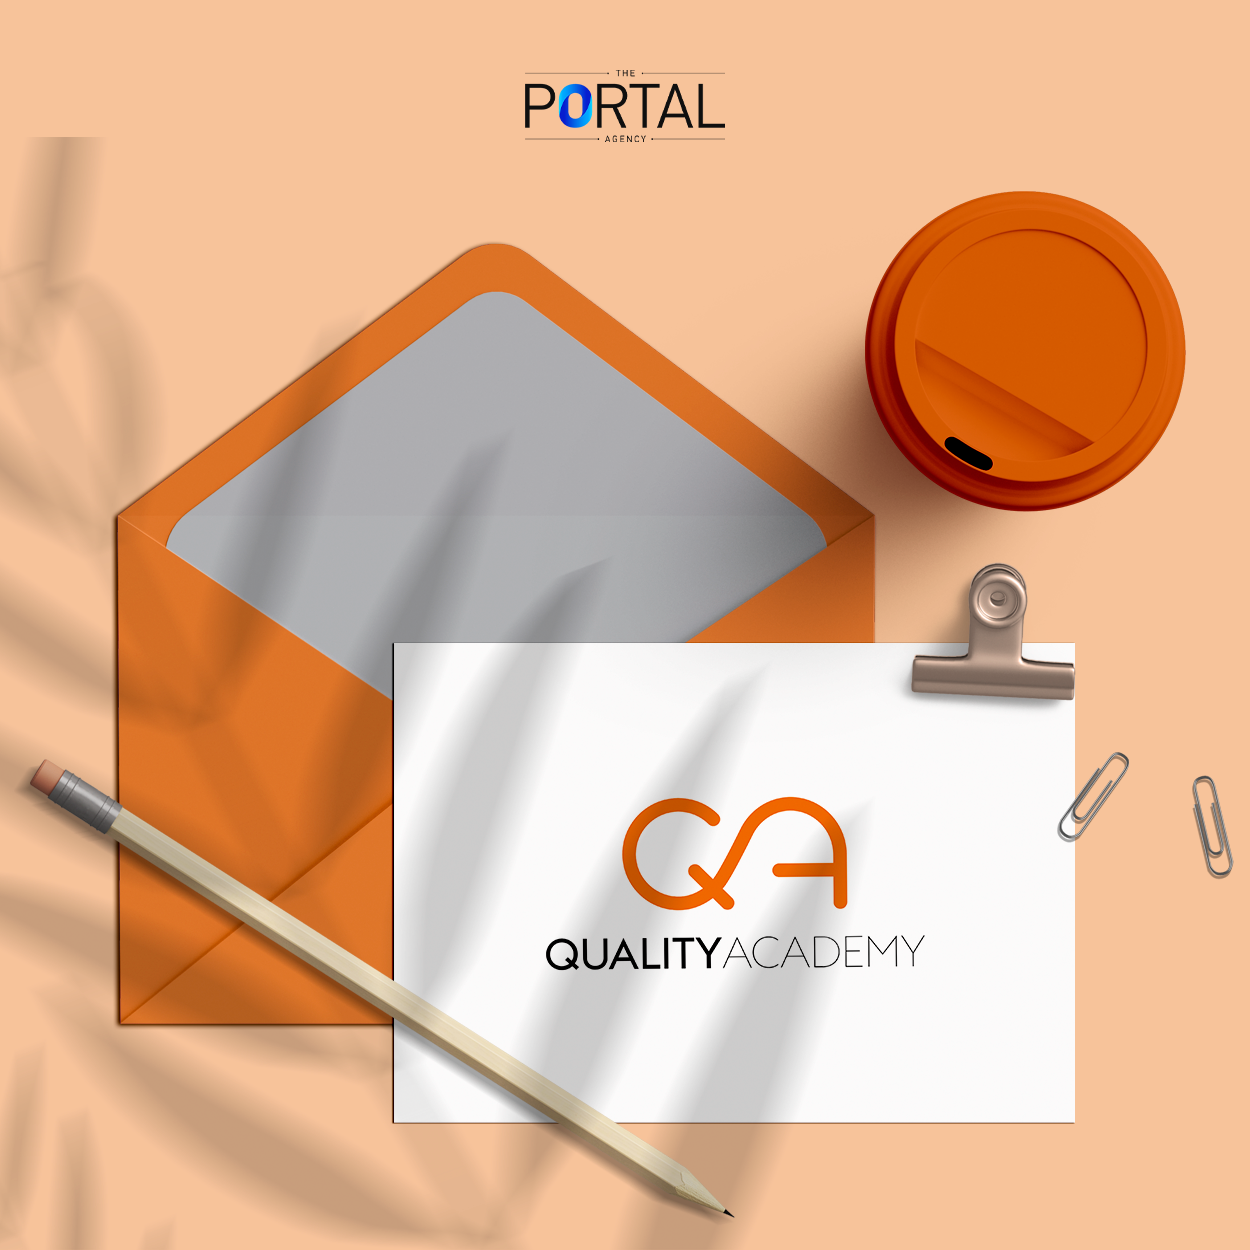 https://theportalagency.com/project/quality-academy-branding/